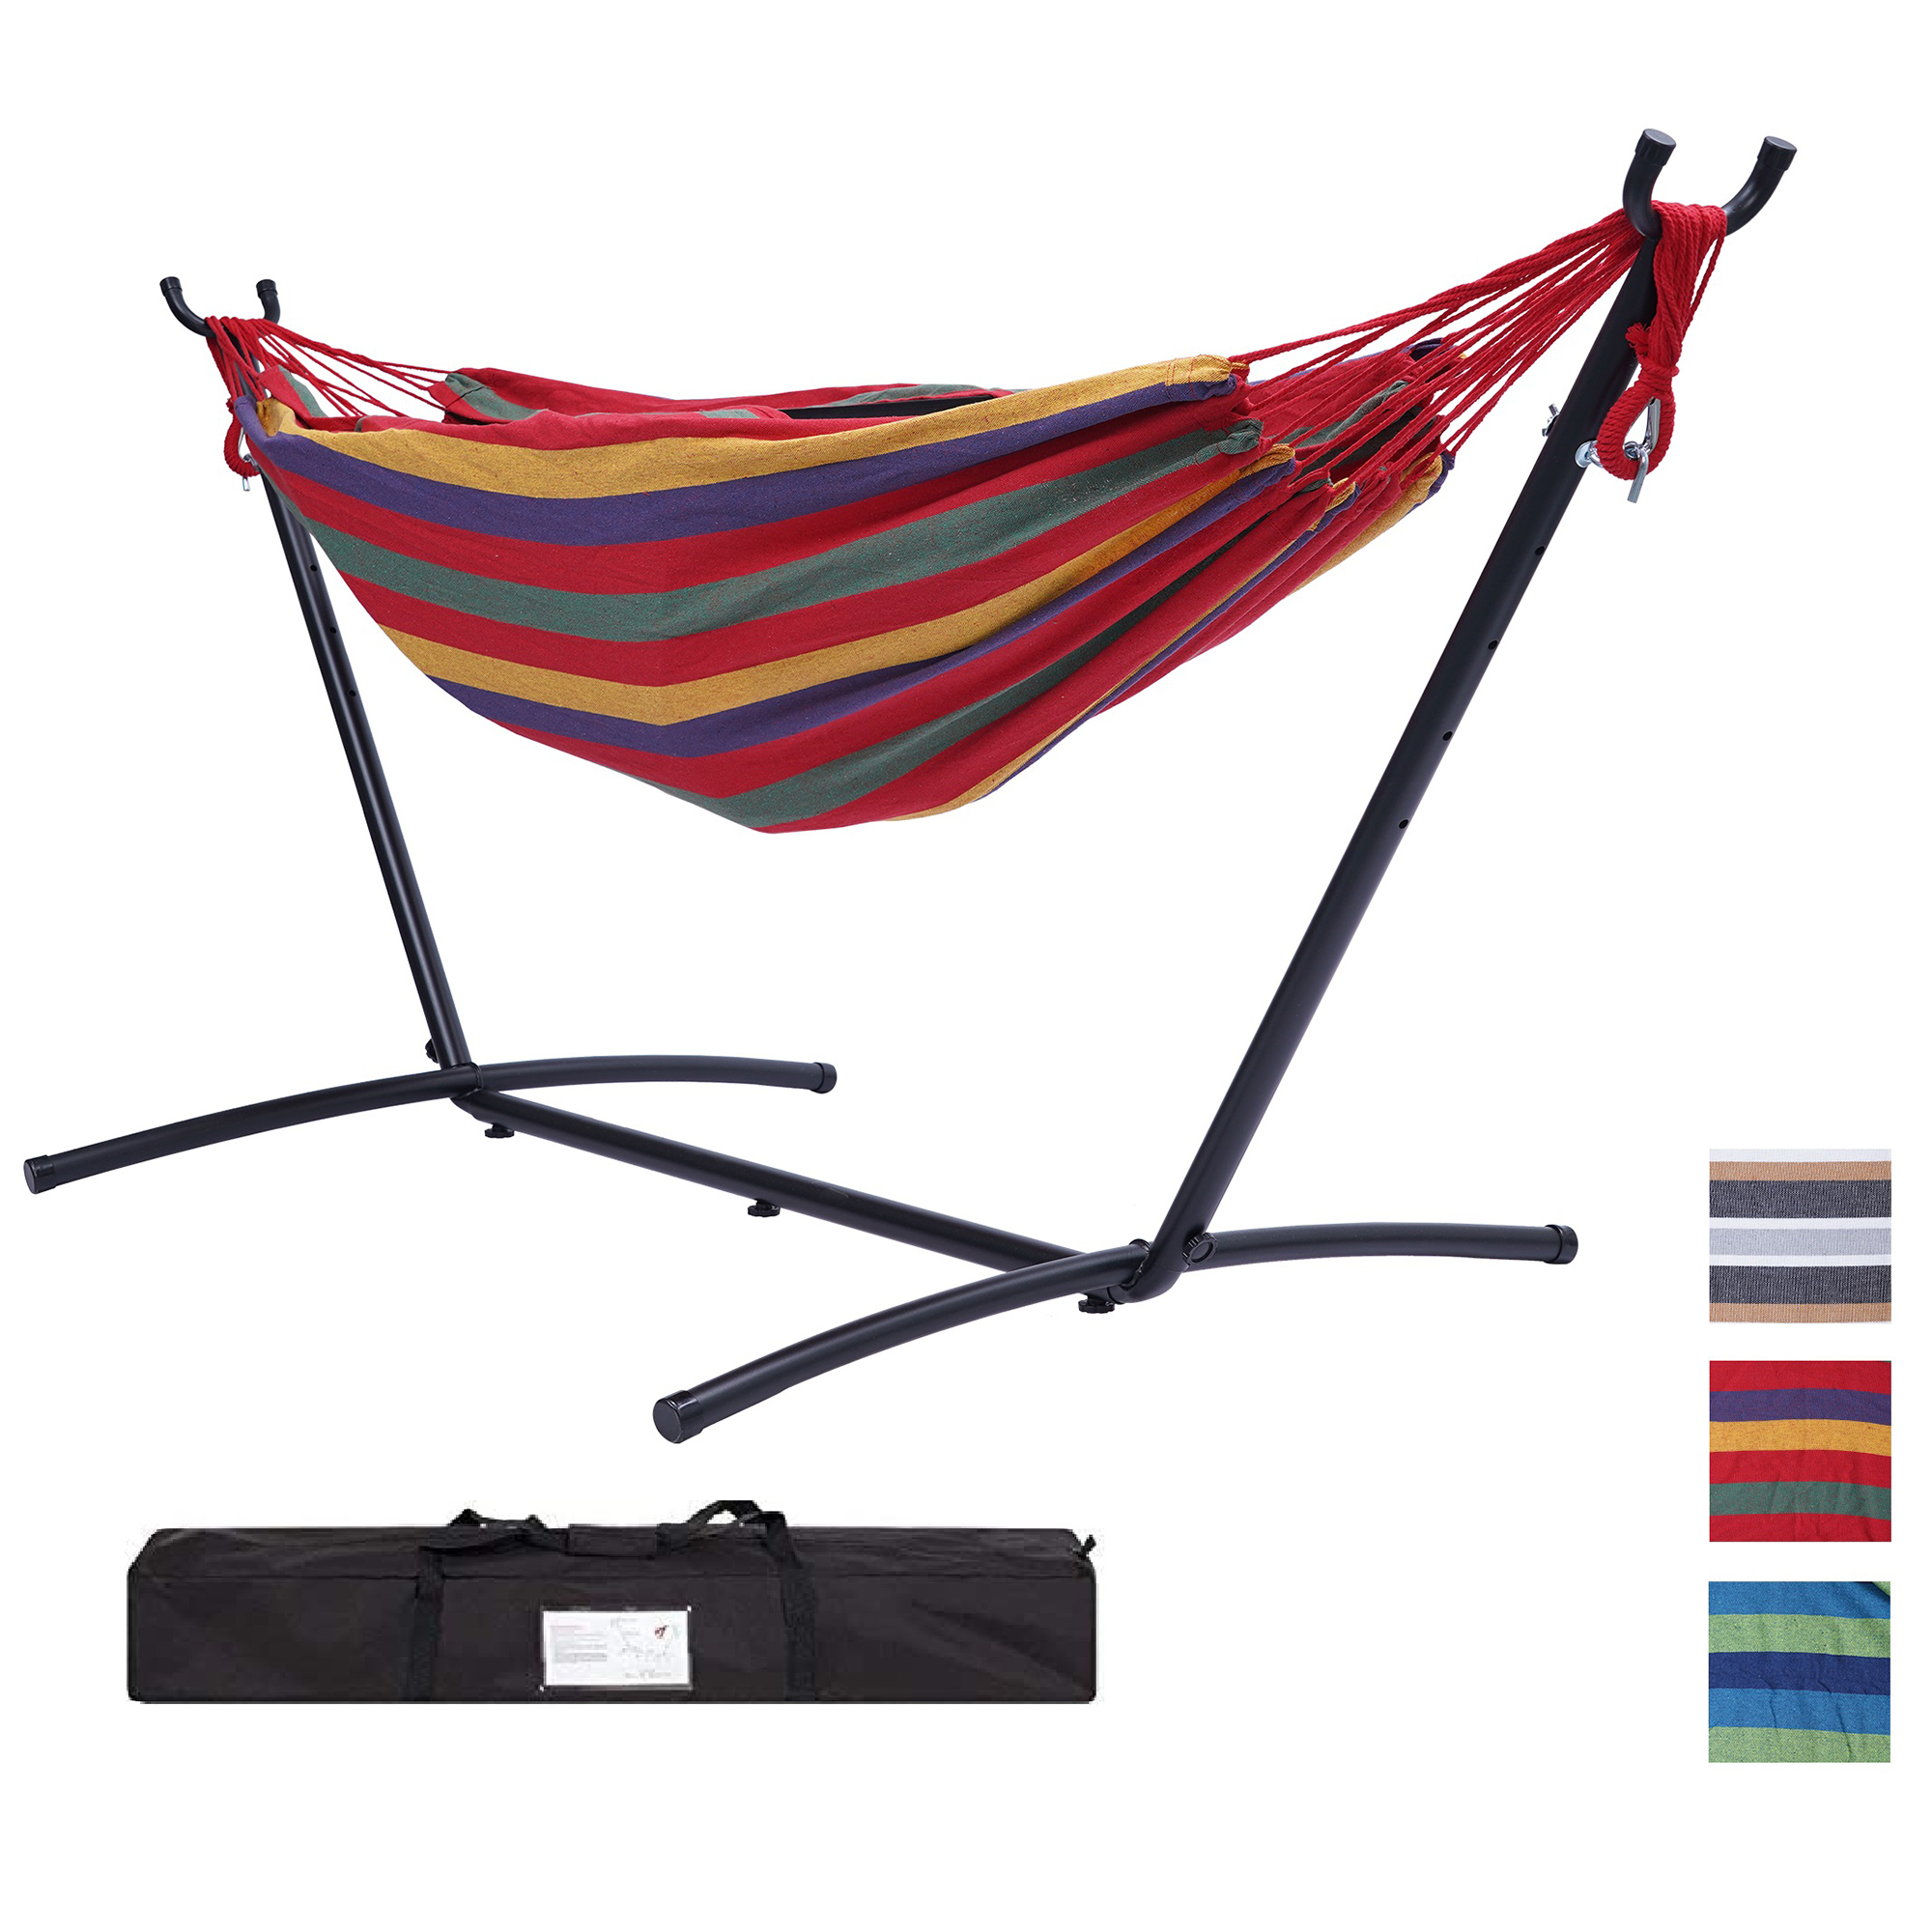 Clearance! Large Double Hammock Bed Set with Carrying Bag, Portable Hammock Chair Swing with Strong Steel Stand, Lightweight Hammocks for Backyard, Porch, Garden, Outdoor and Indoor Use, K3964 - image 1 of 8